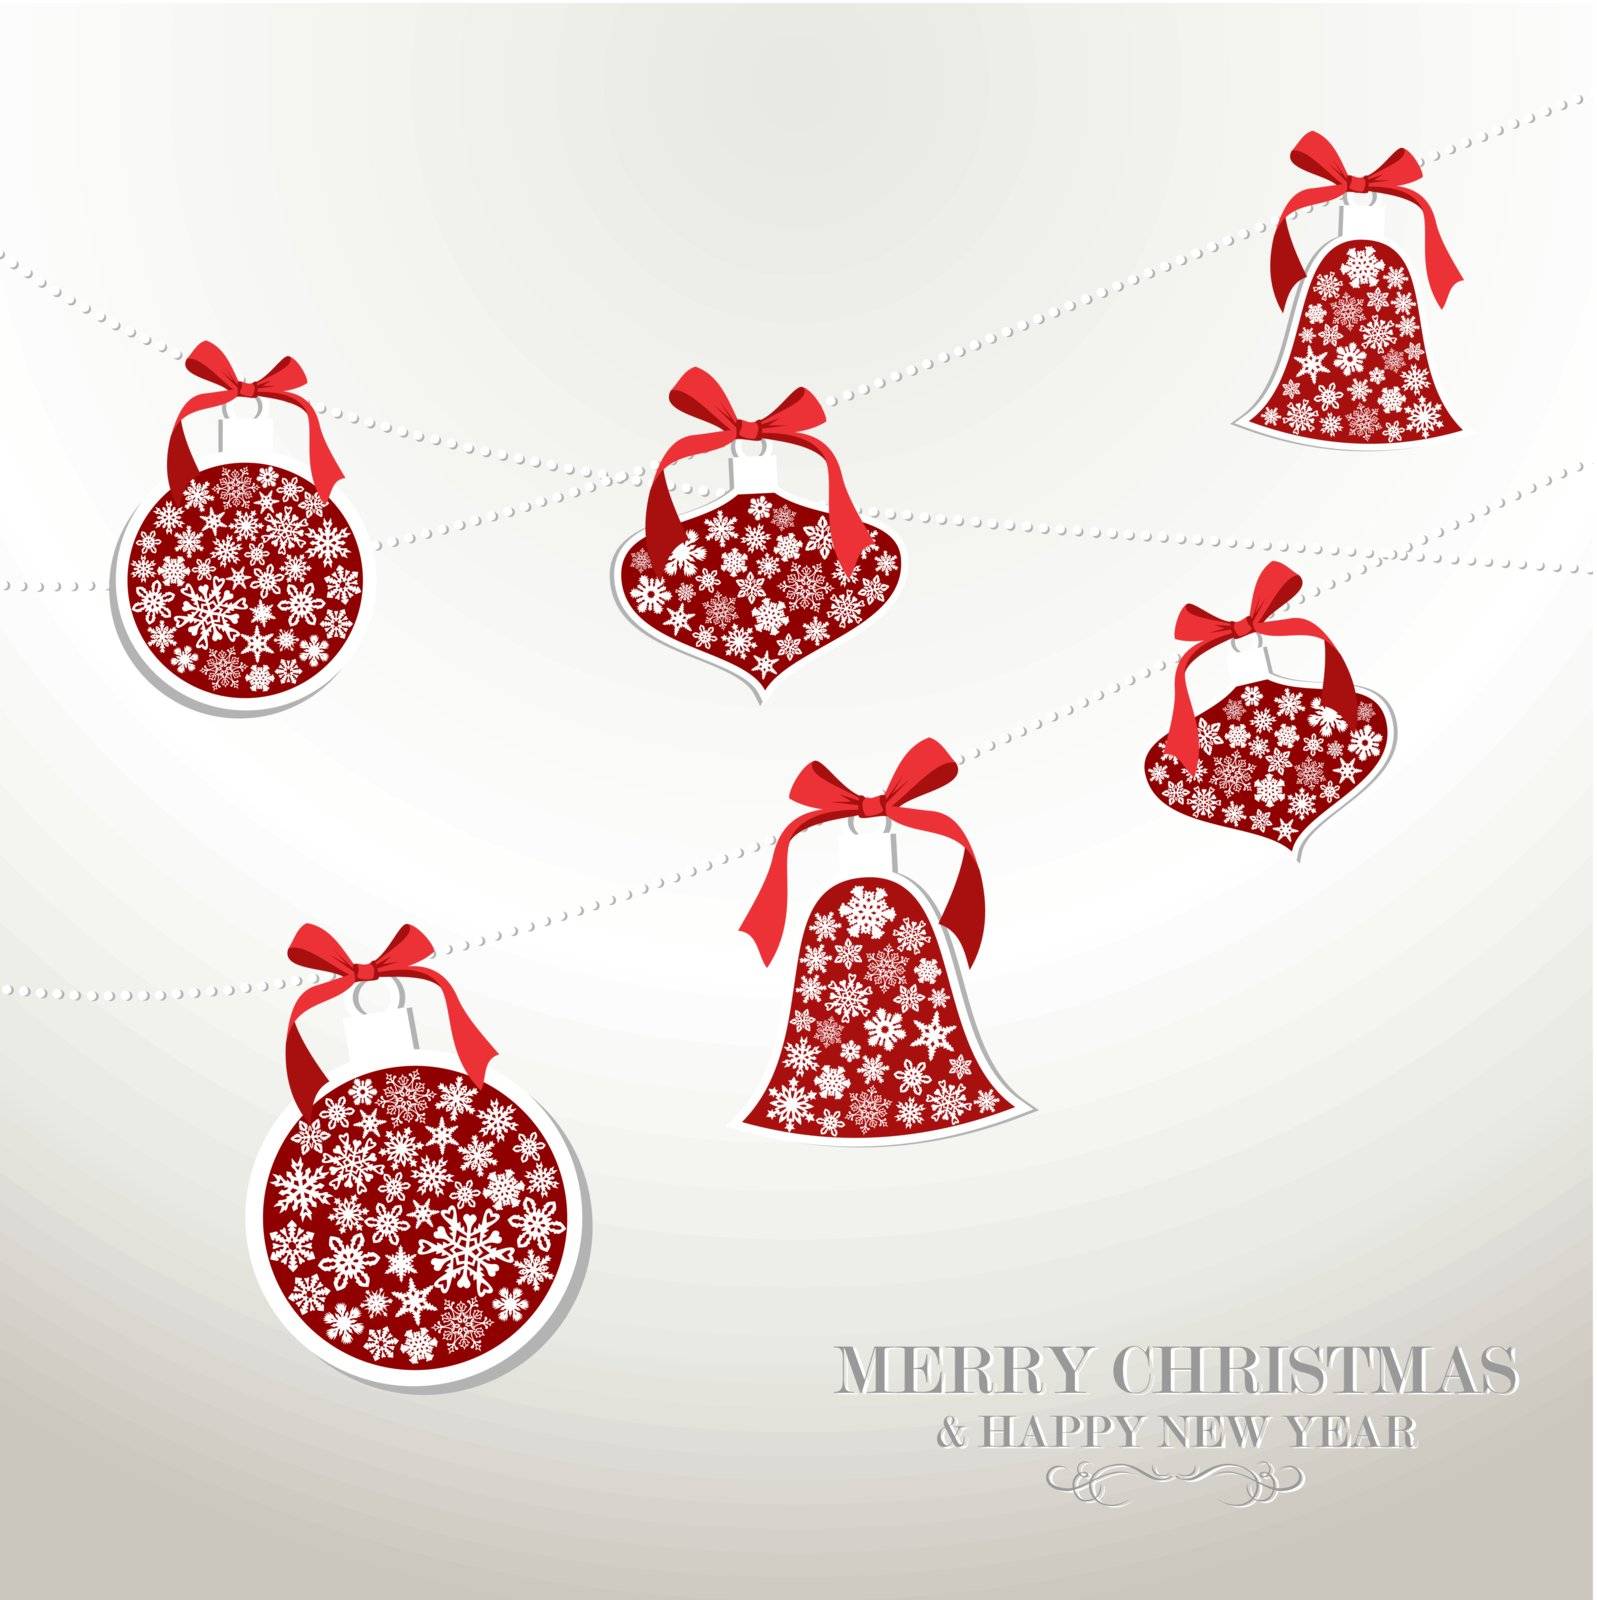 Merry Christmas snowflakes baubles by cienpies